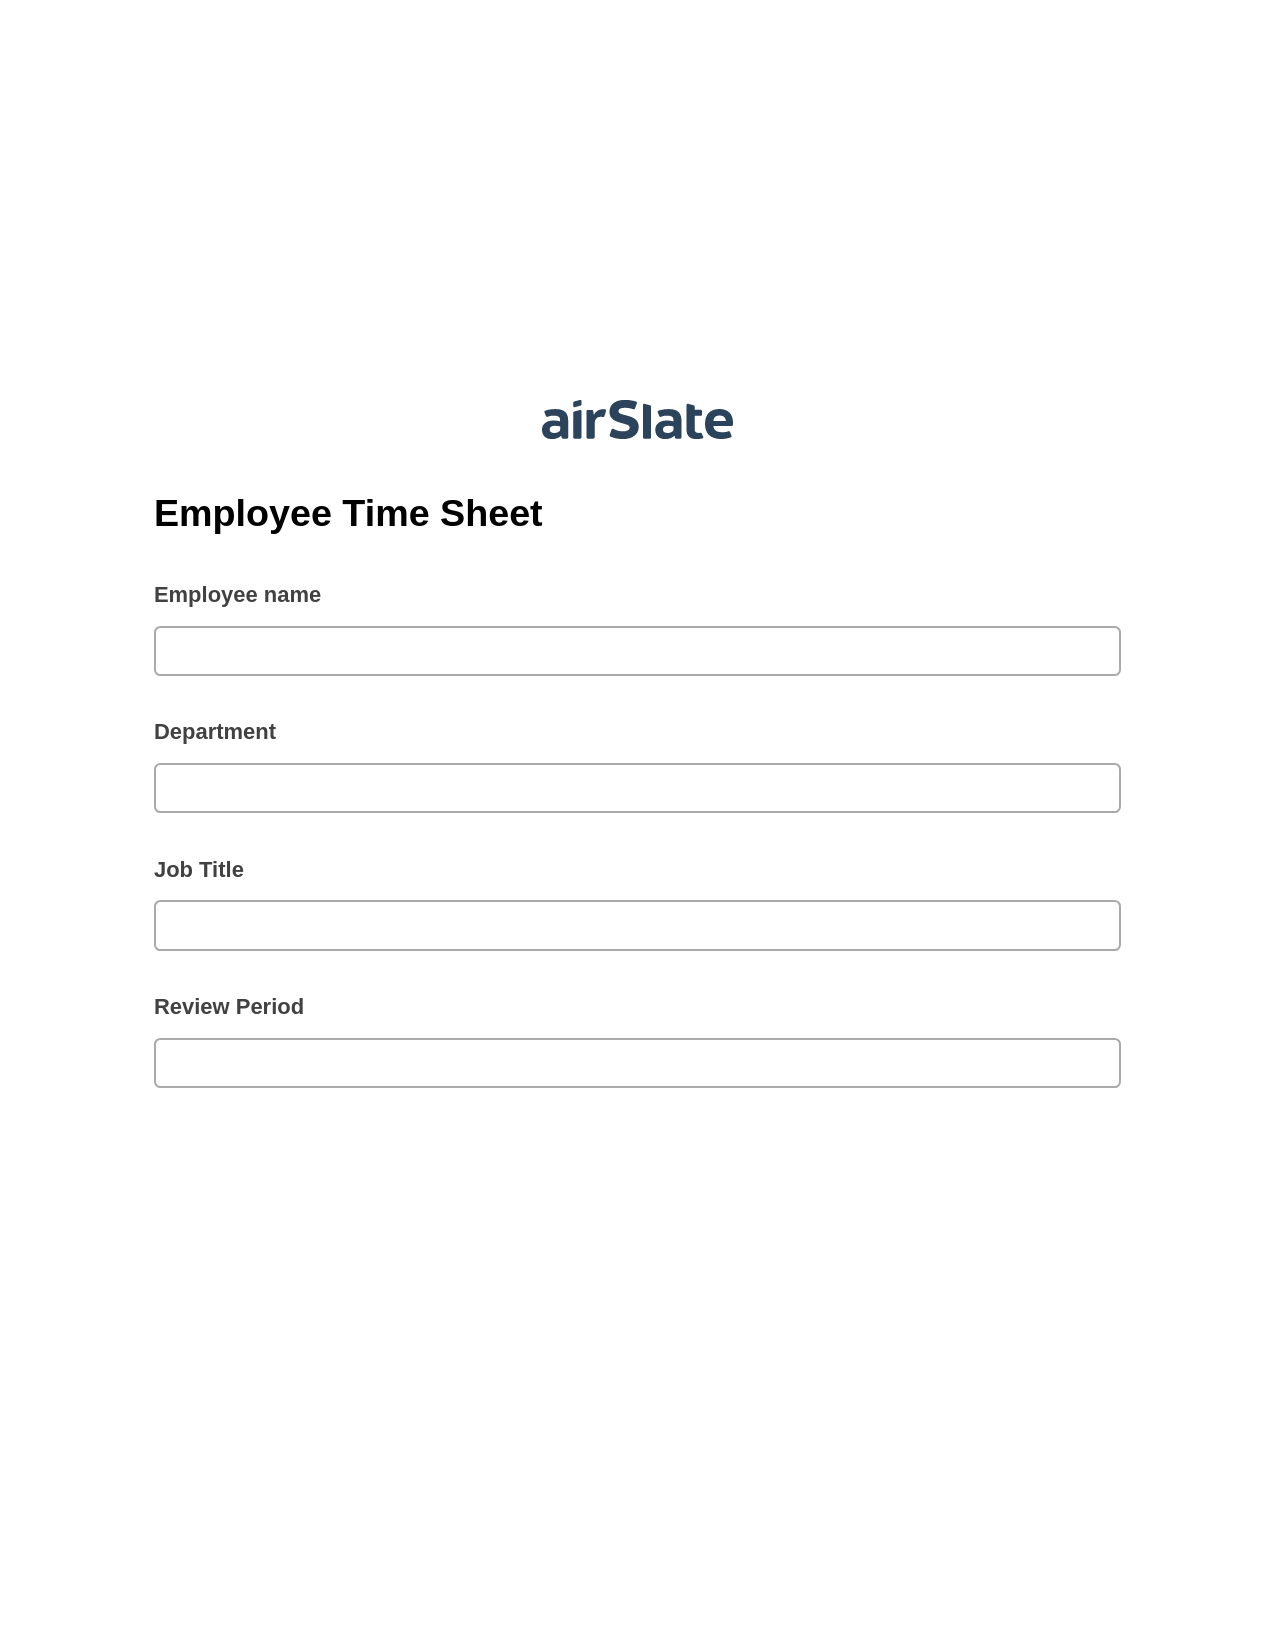 Multirole Employee Time Sheet Pre-fill from MS Dynamics 365 Records, Create Salesforce Records Bot, Export to Google Sheet Bot